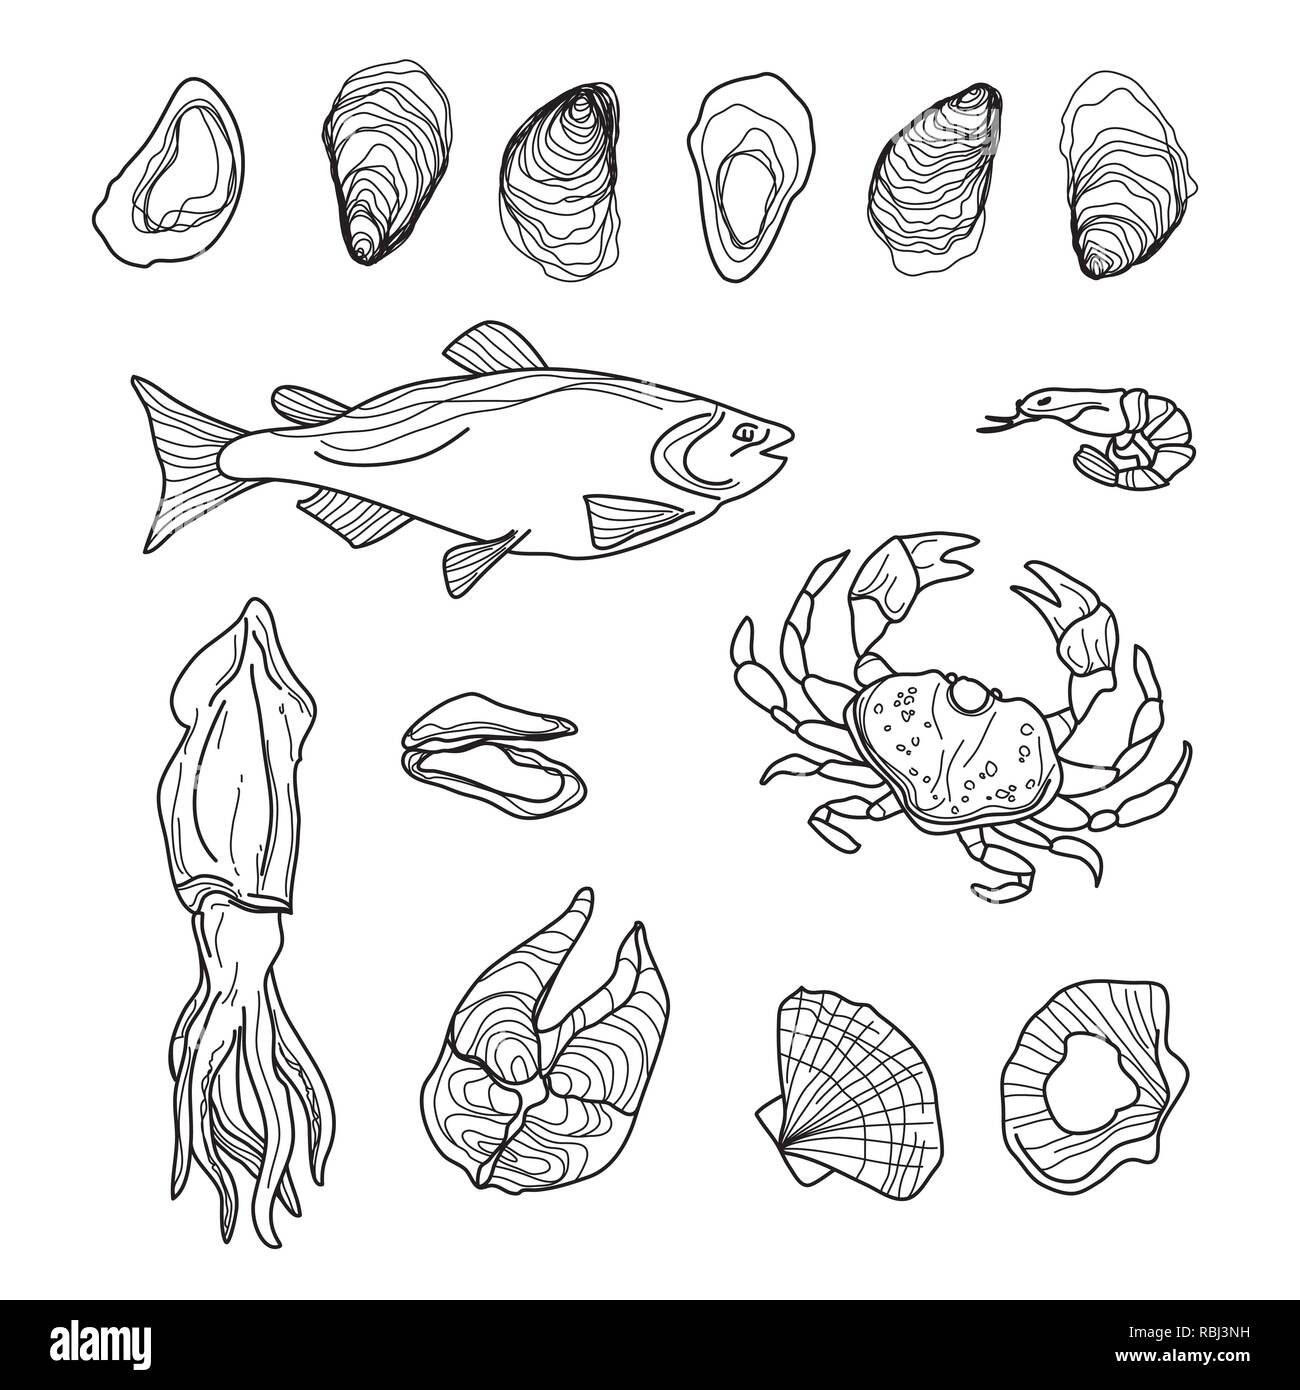 Hand Drawn Seafood Collection on White. Fish, Crab, Squid, Oysters, Shrimps, Mussels, Salmon Stock Vector